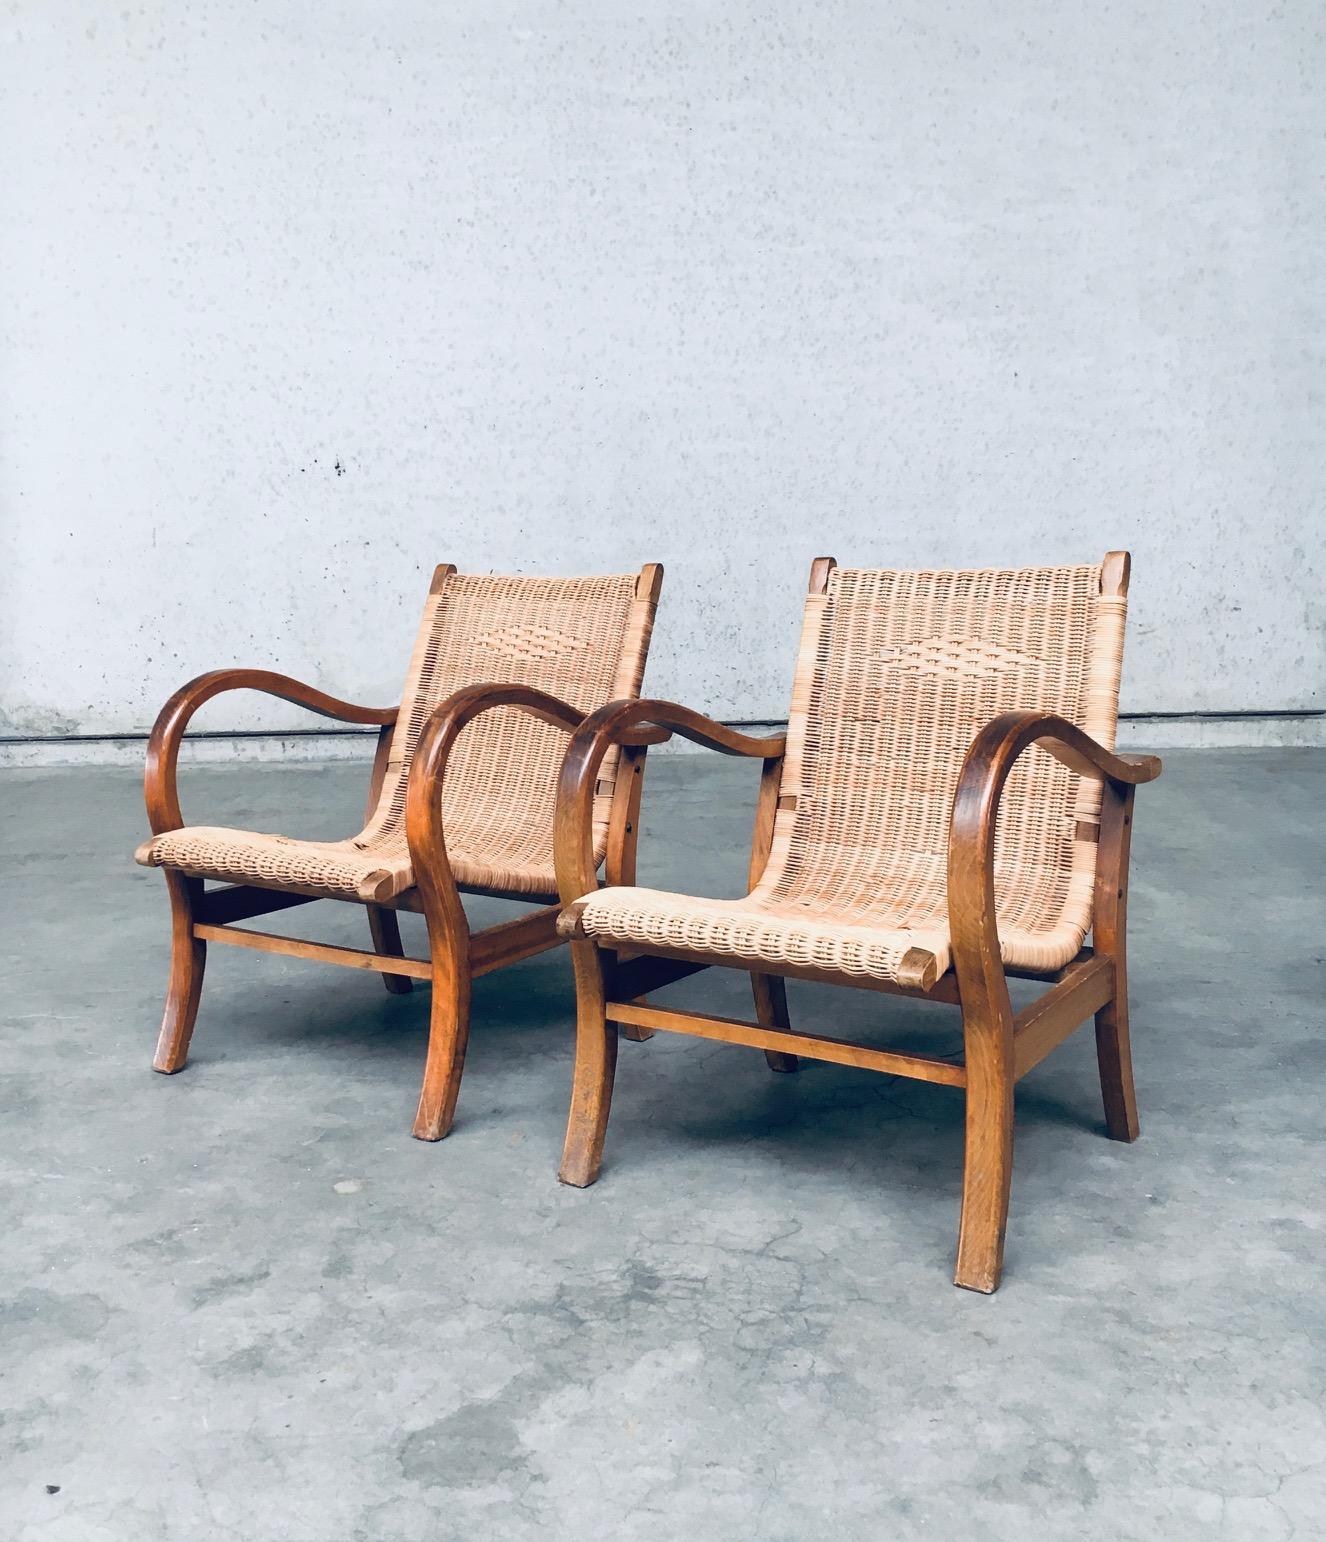 Vintage Bauhaus Design Lounge Chair set of 2. Designed by Erich Dieckmann. Made in the 1930's, Germany. Steam bent beech wooden frame with cane rattan woven seat and back. The cane has some minor damages which reflects it's age and use. They come in